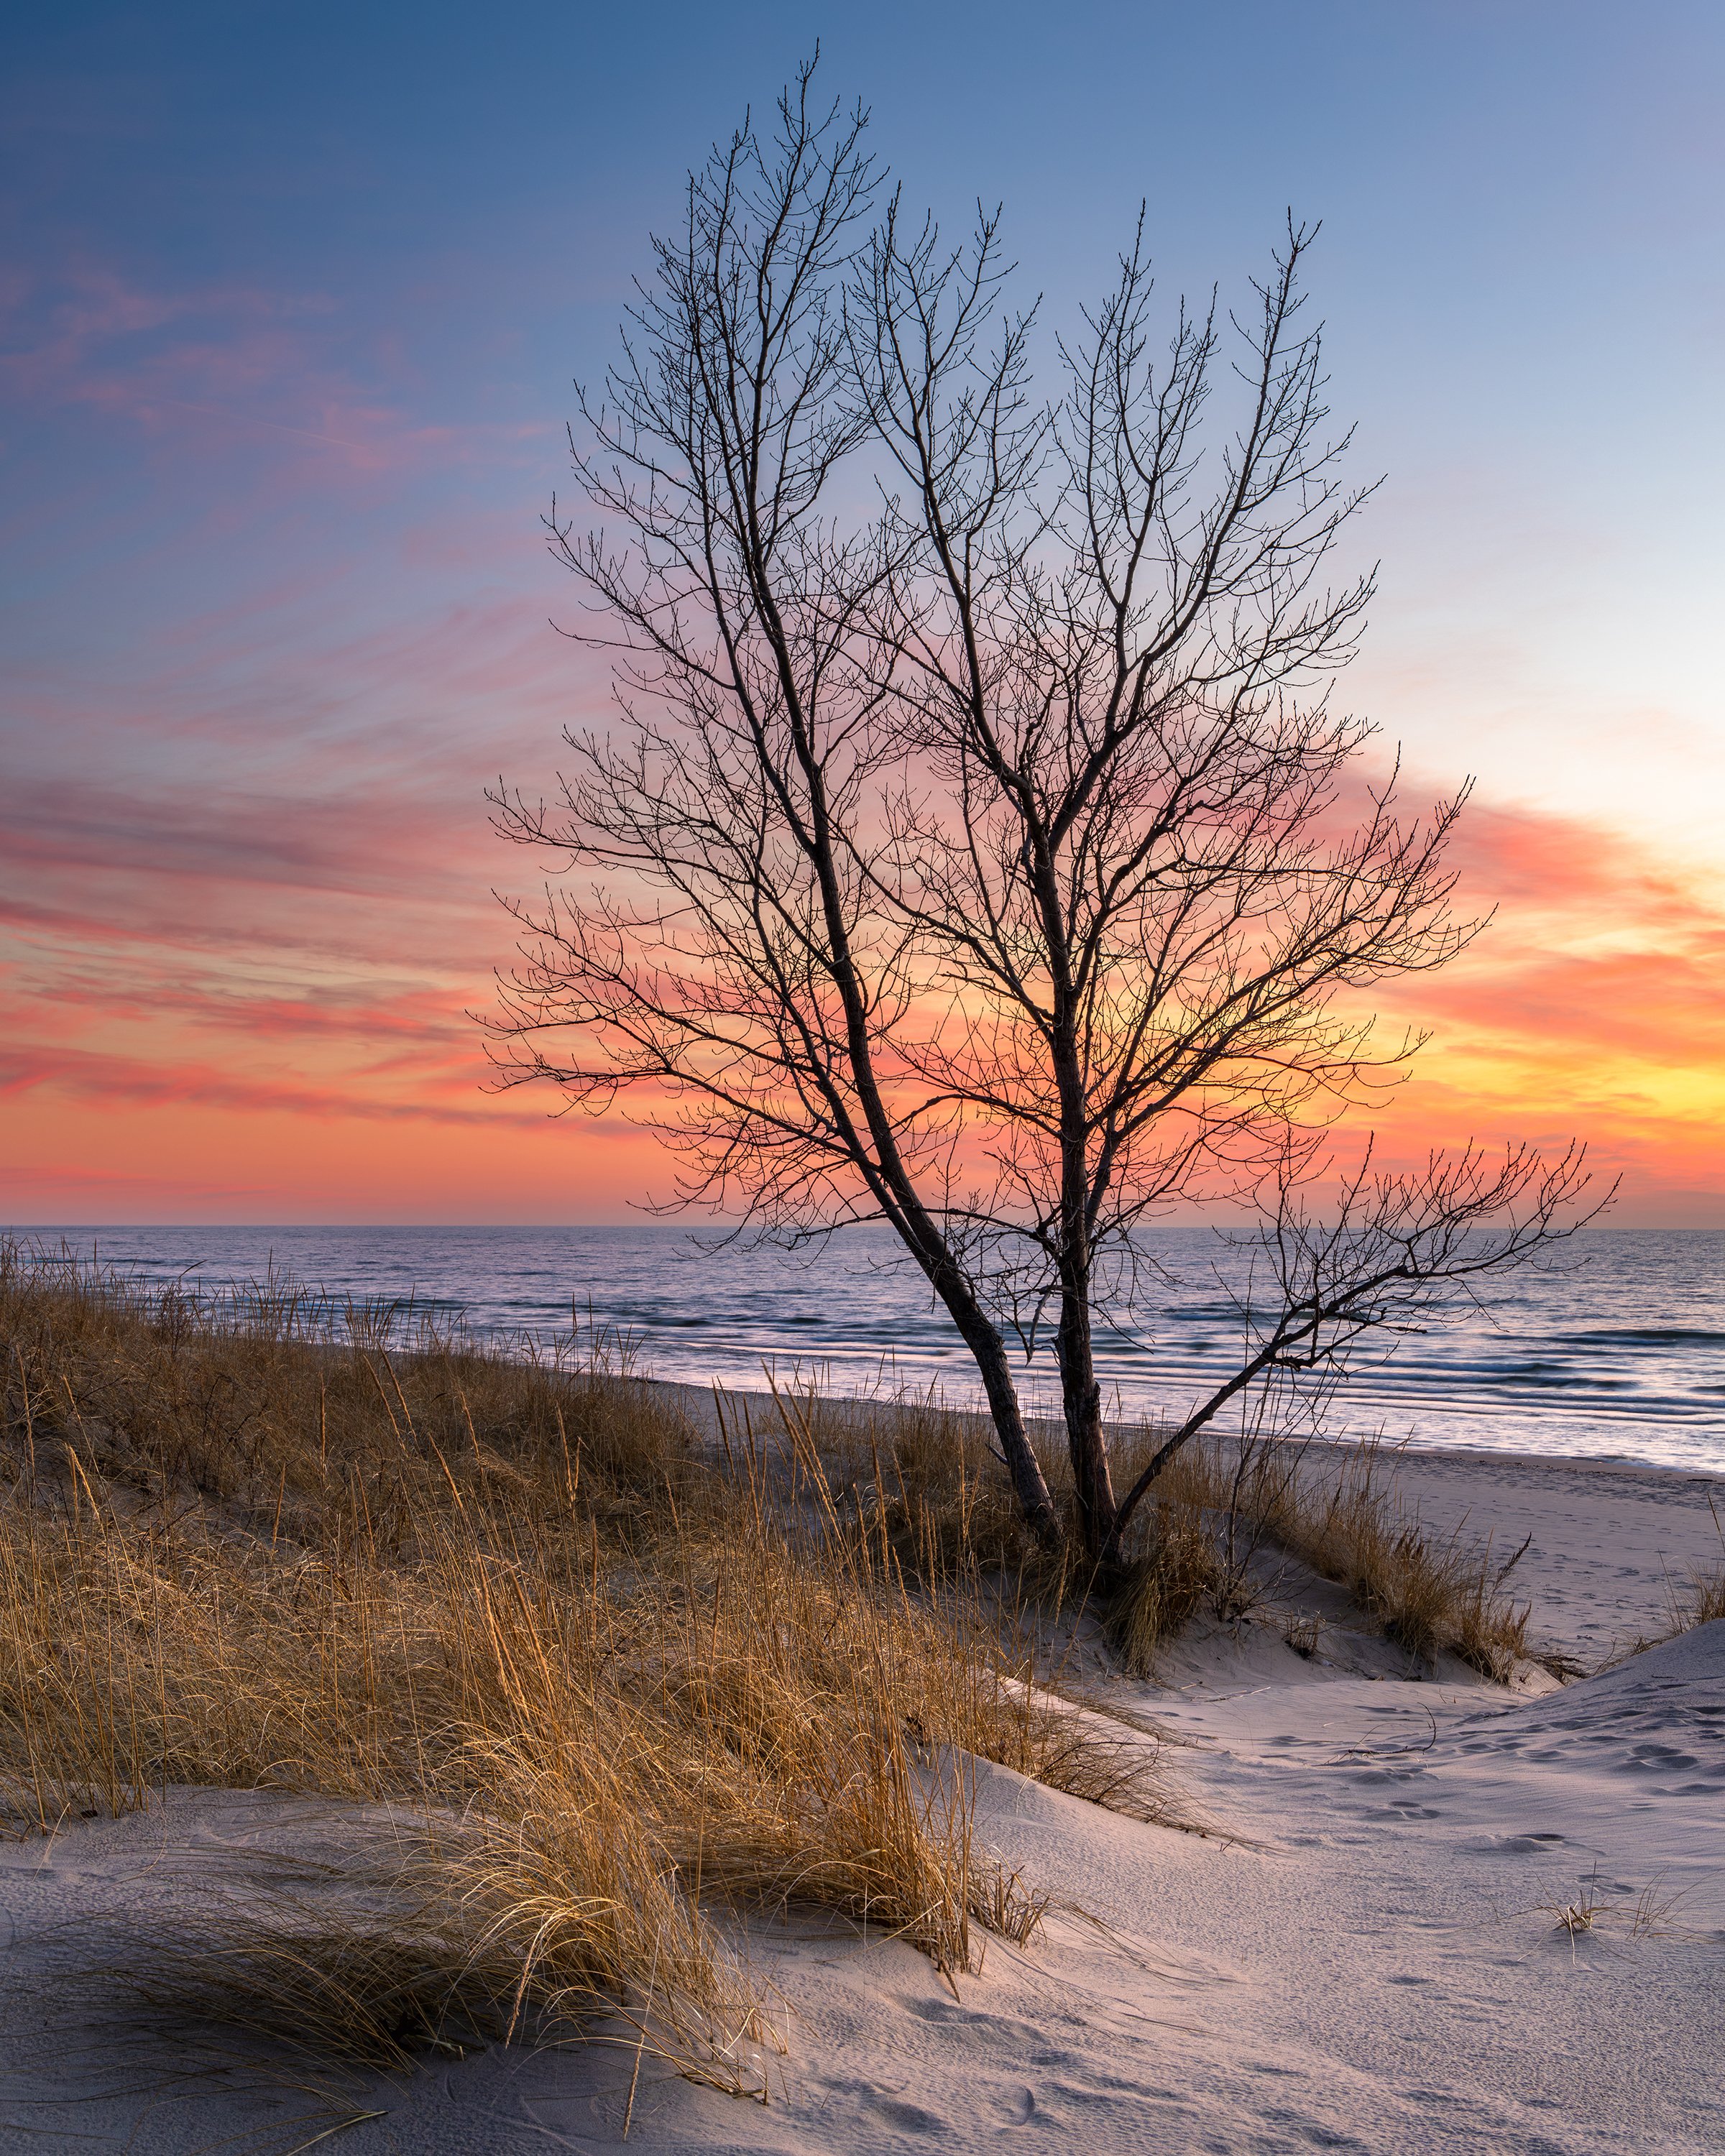  A tree in the sand dunes at sunset. 